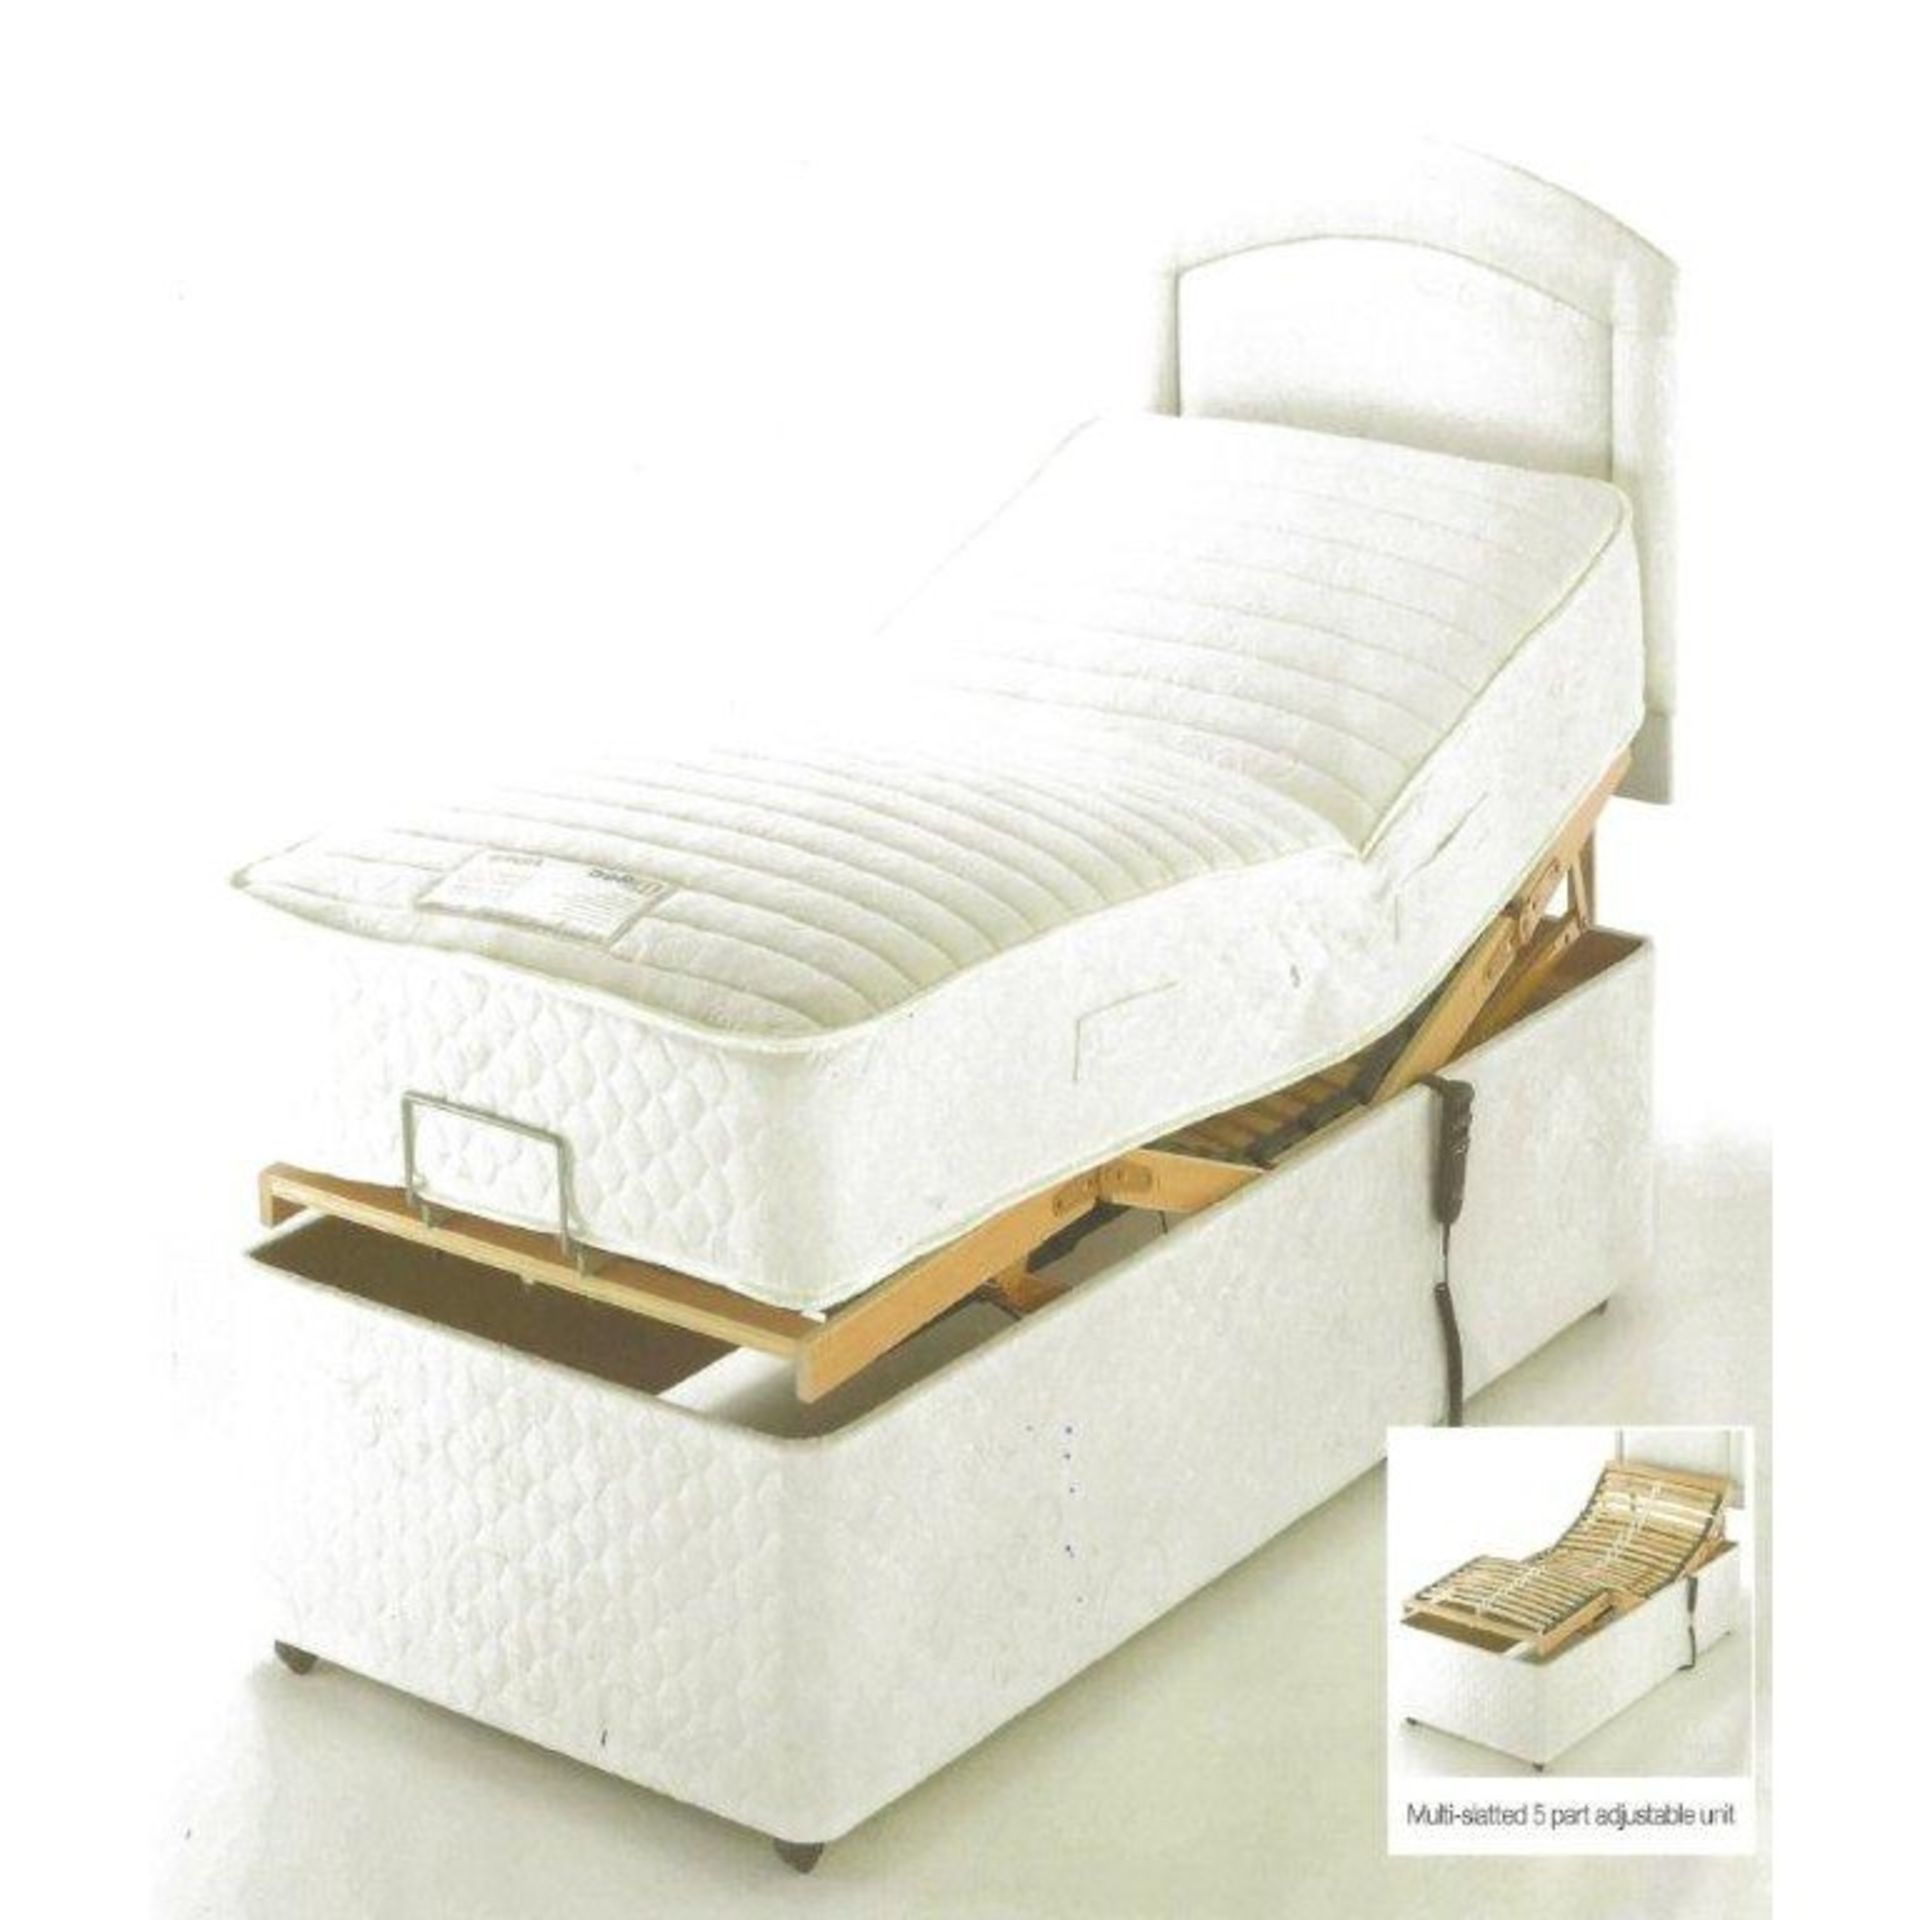 Brand New 3ê0 Single Alpina Adjustable Electric Bed With Pocket Sprung Mattress - Image 2 of 3